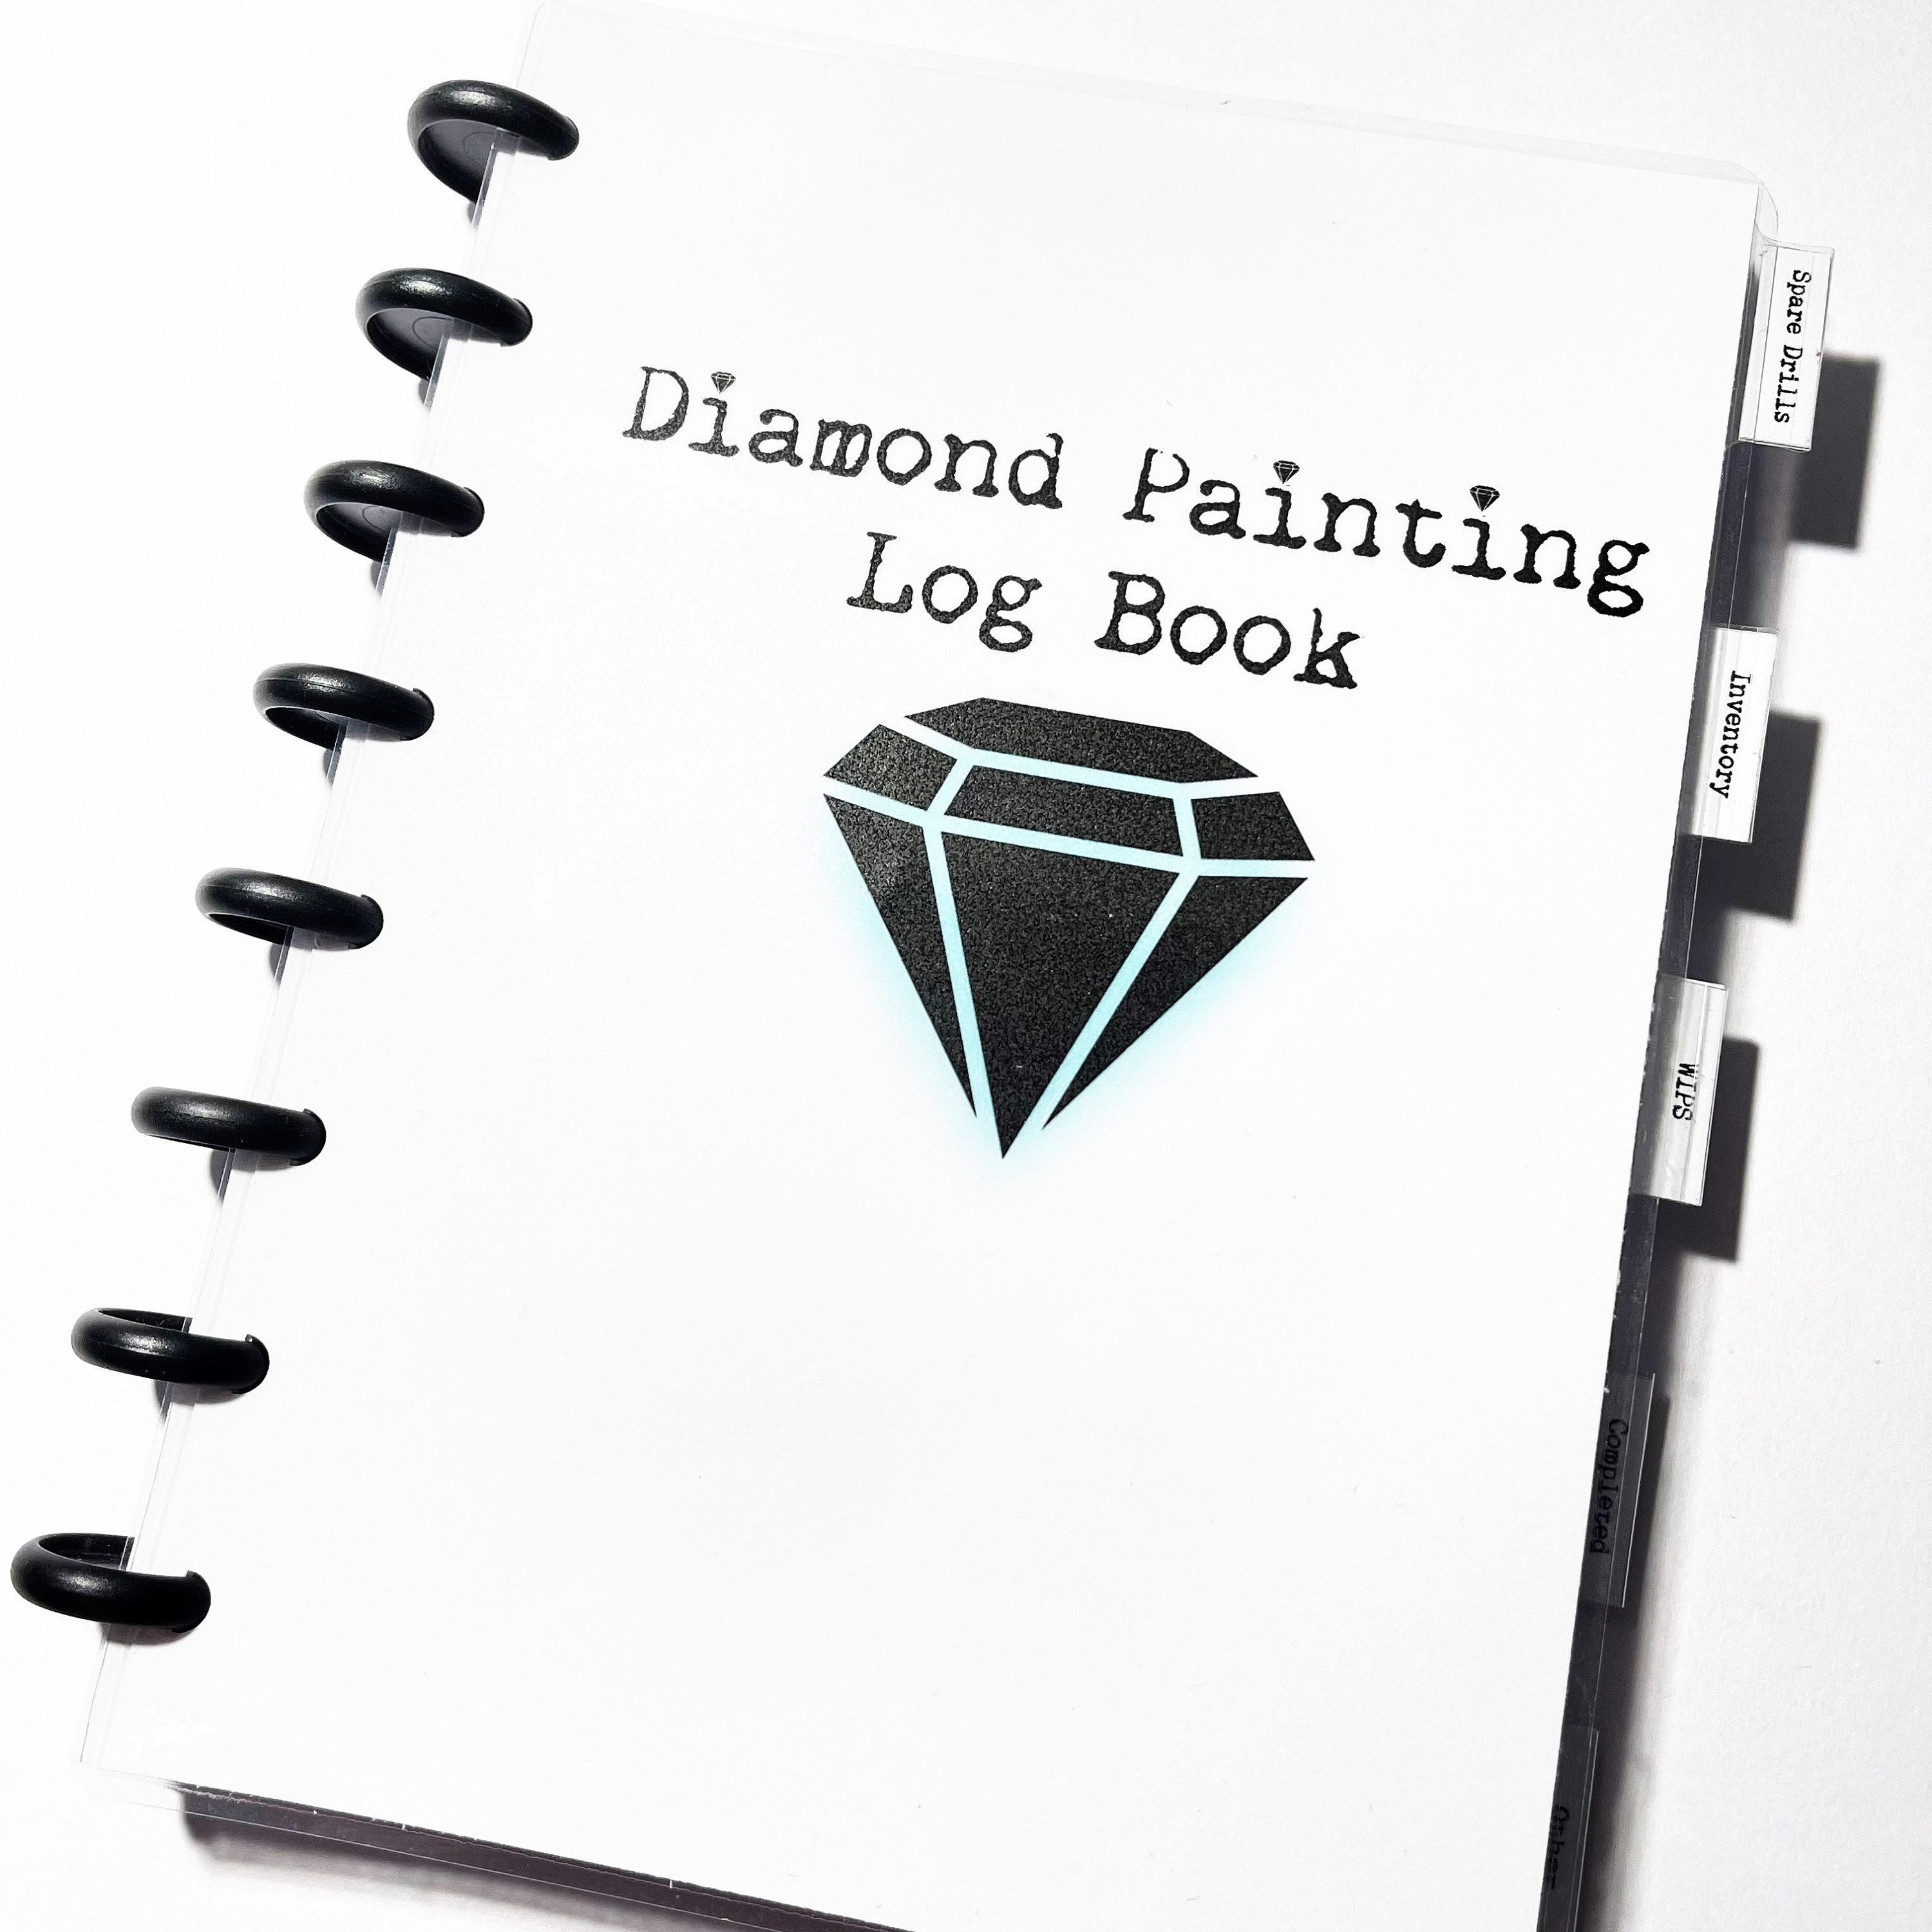 Diamond Painting Log Book  KDP Interior Template for Low